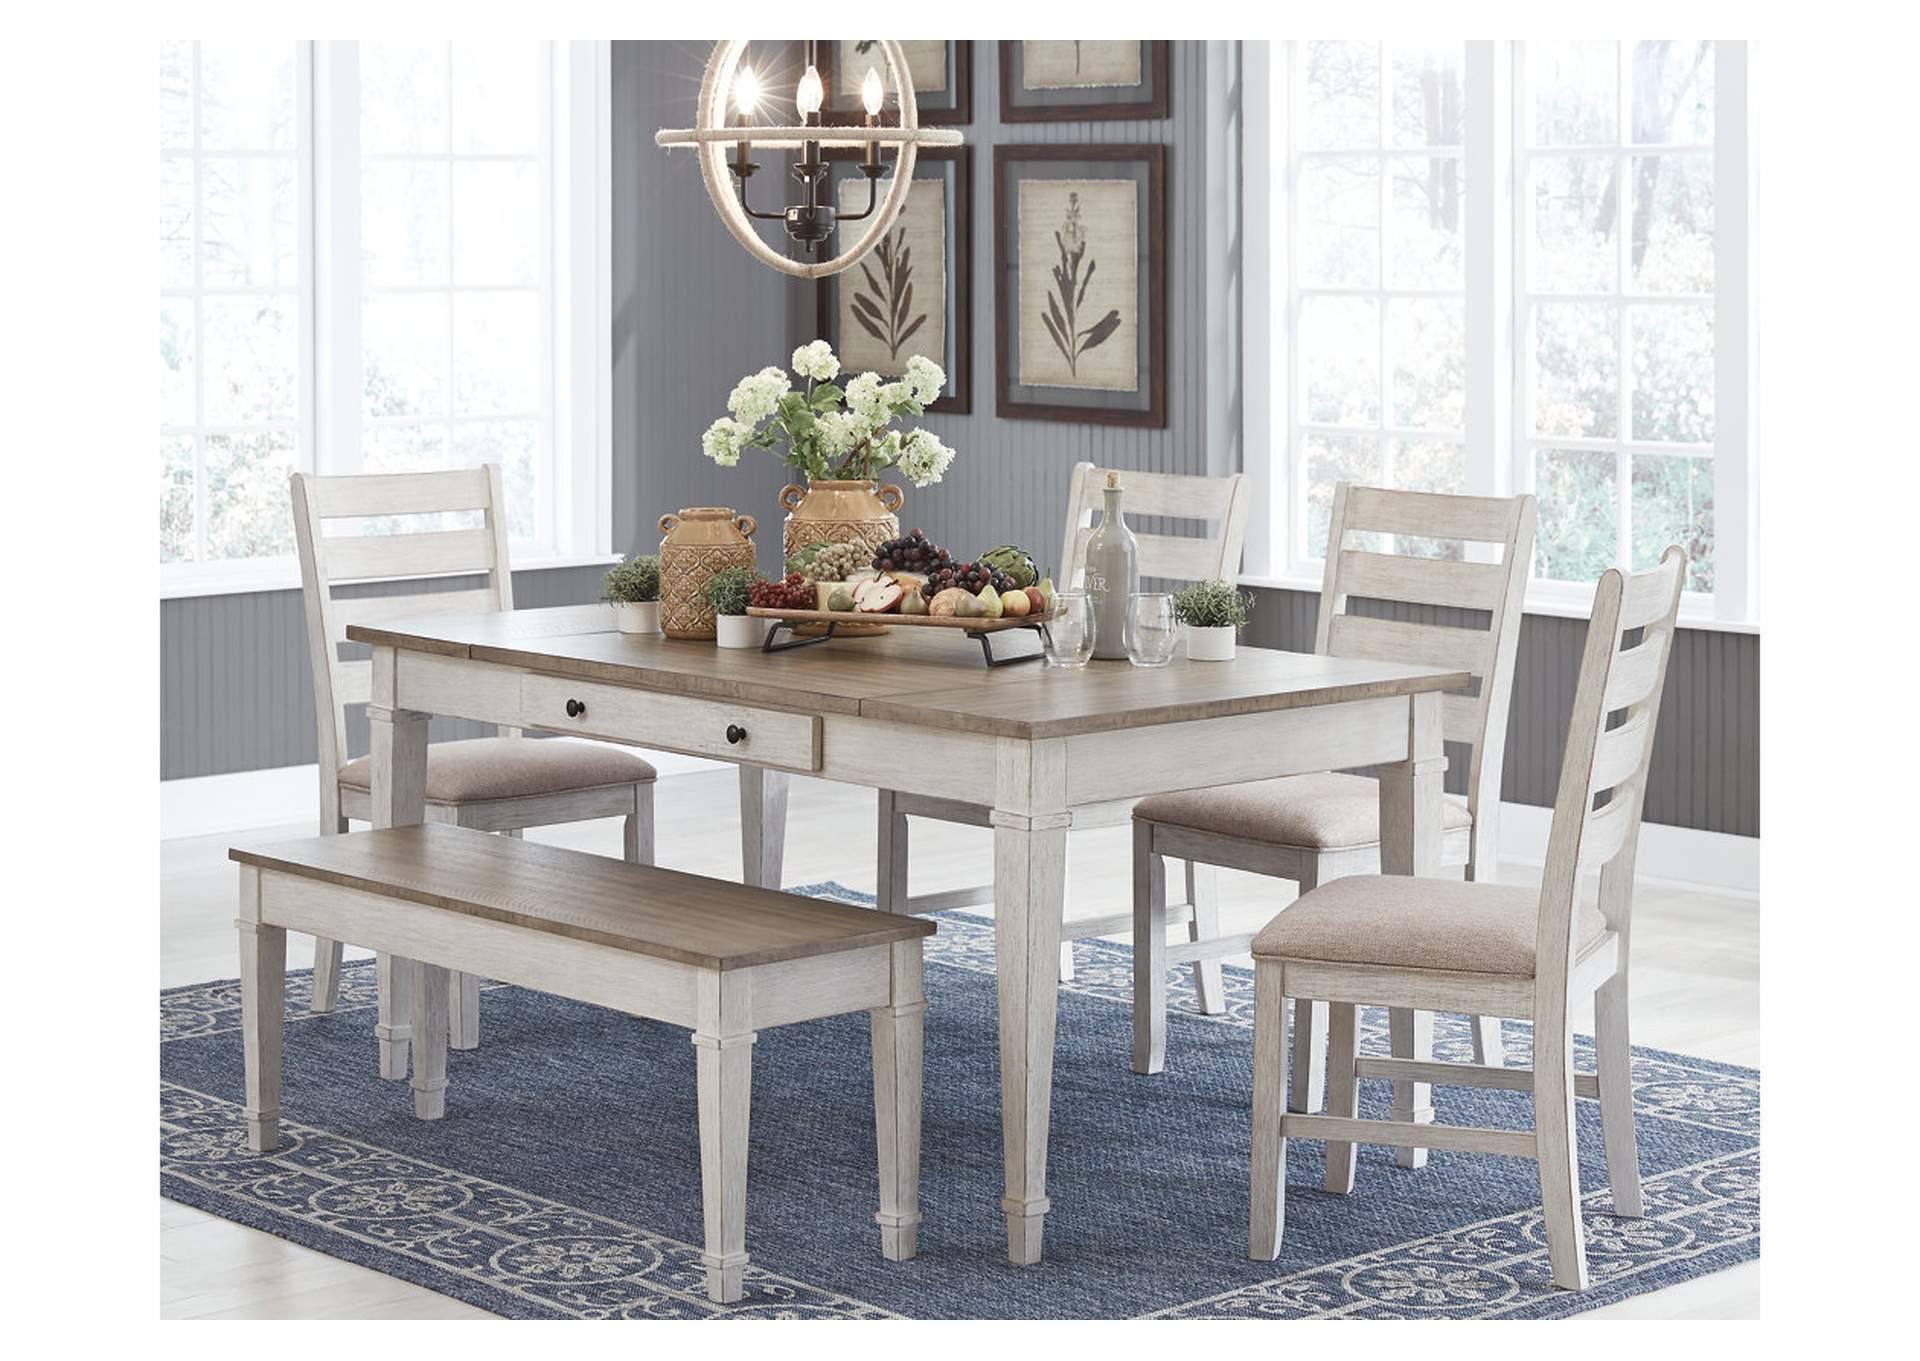 100 Dining Room Table And Chairs Sales